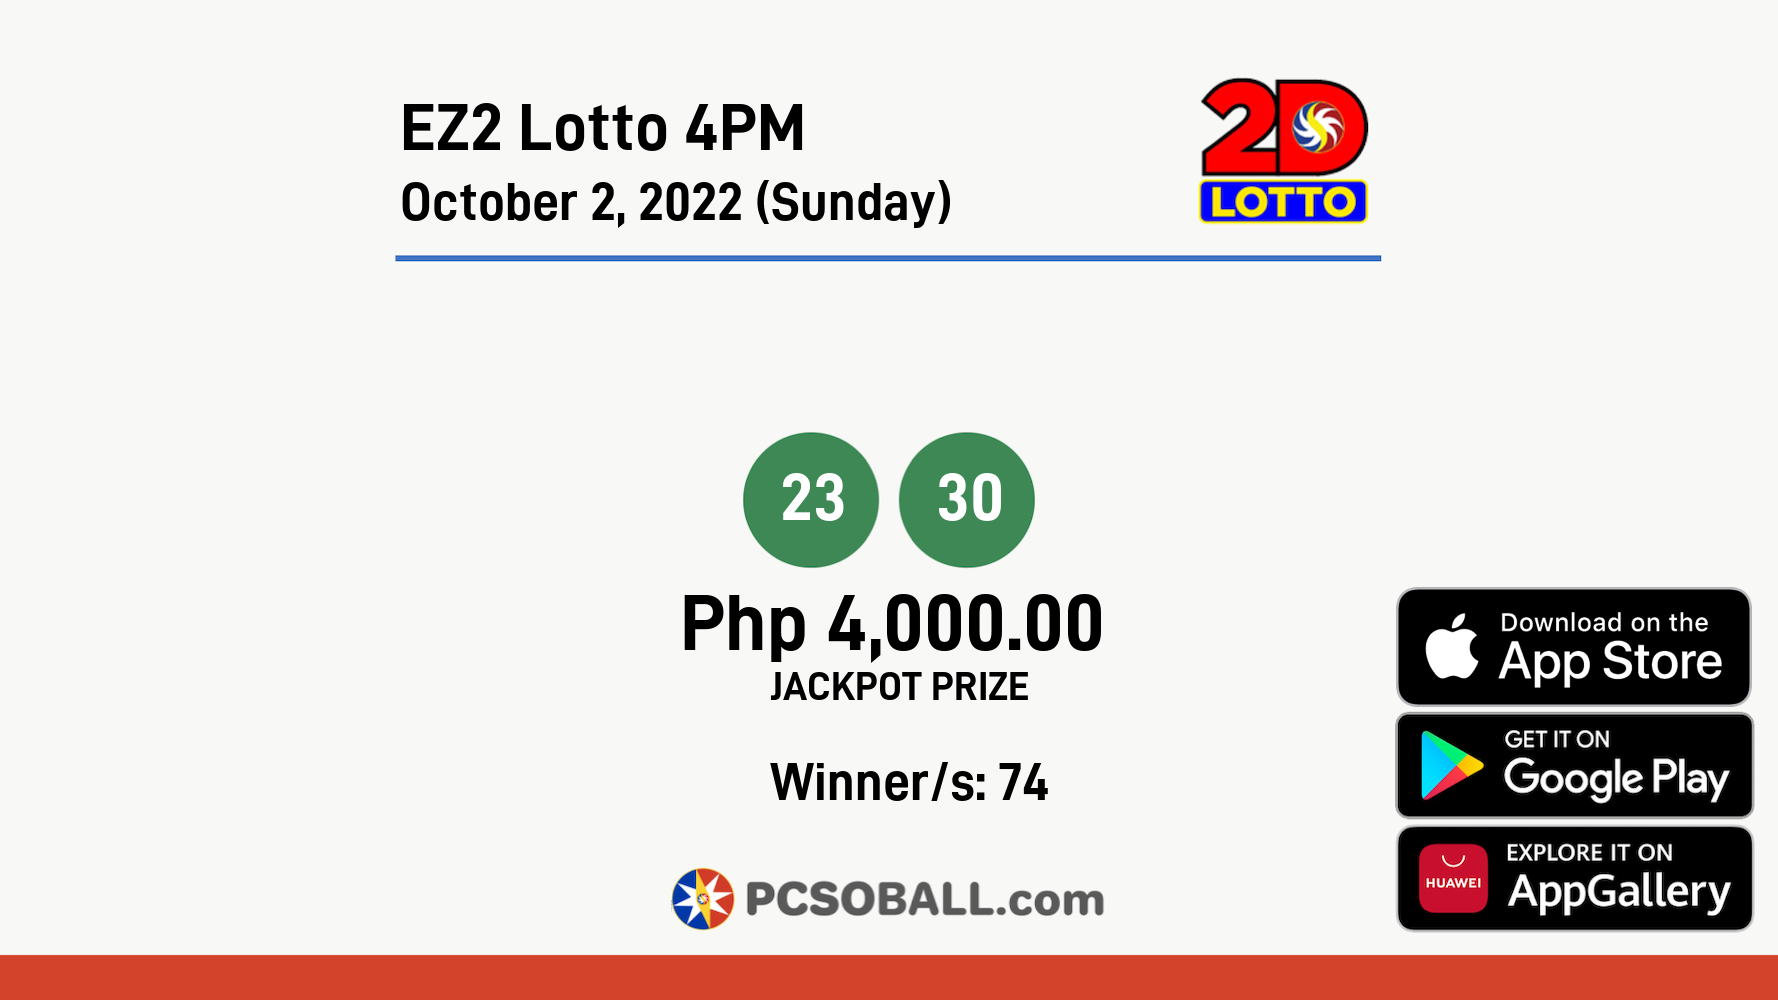 EZ2 Lotto 4PM October 2, 2022 (Sunday) Result